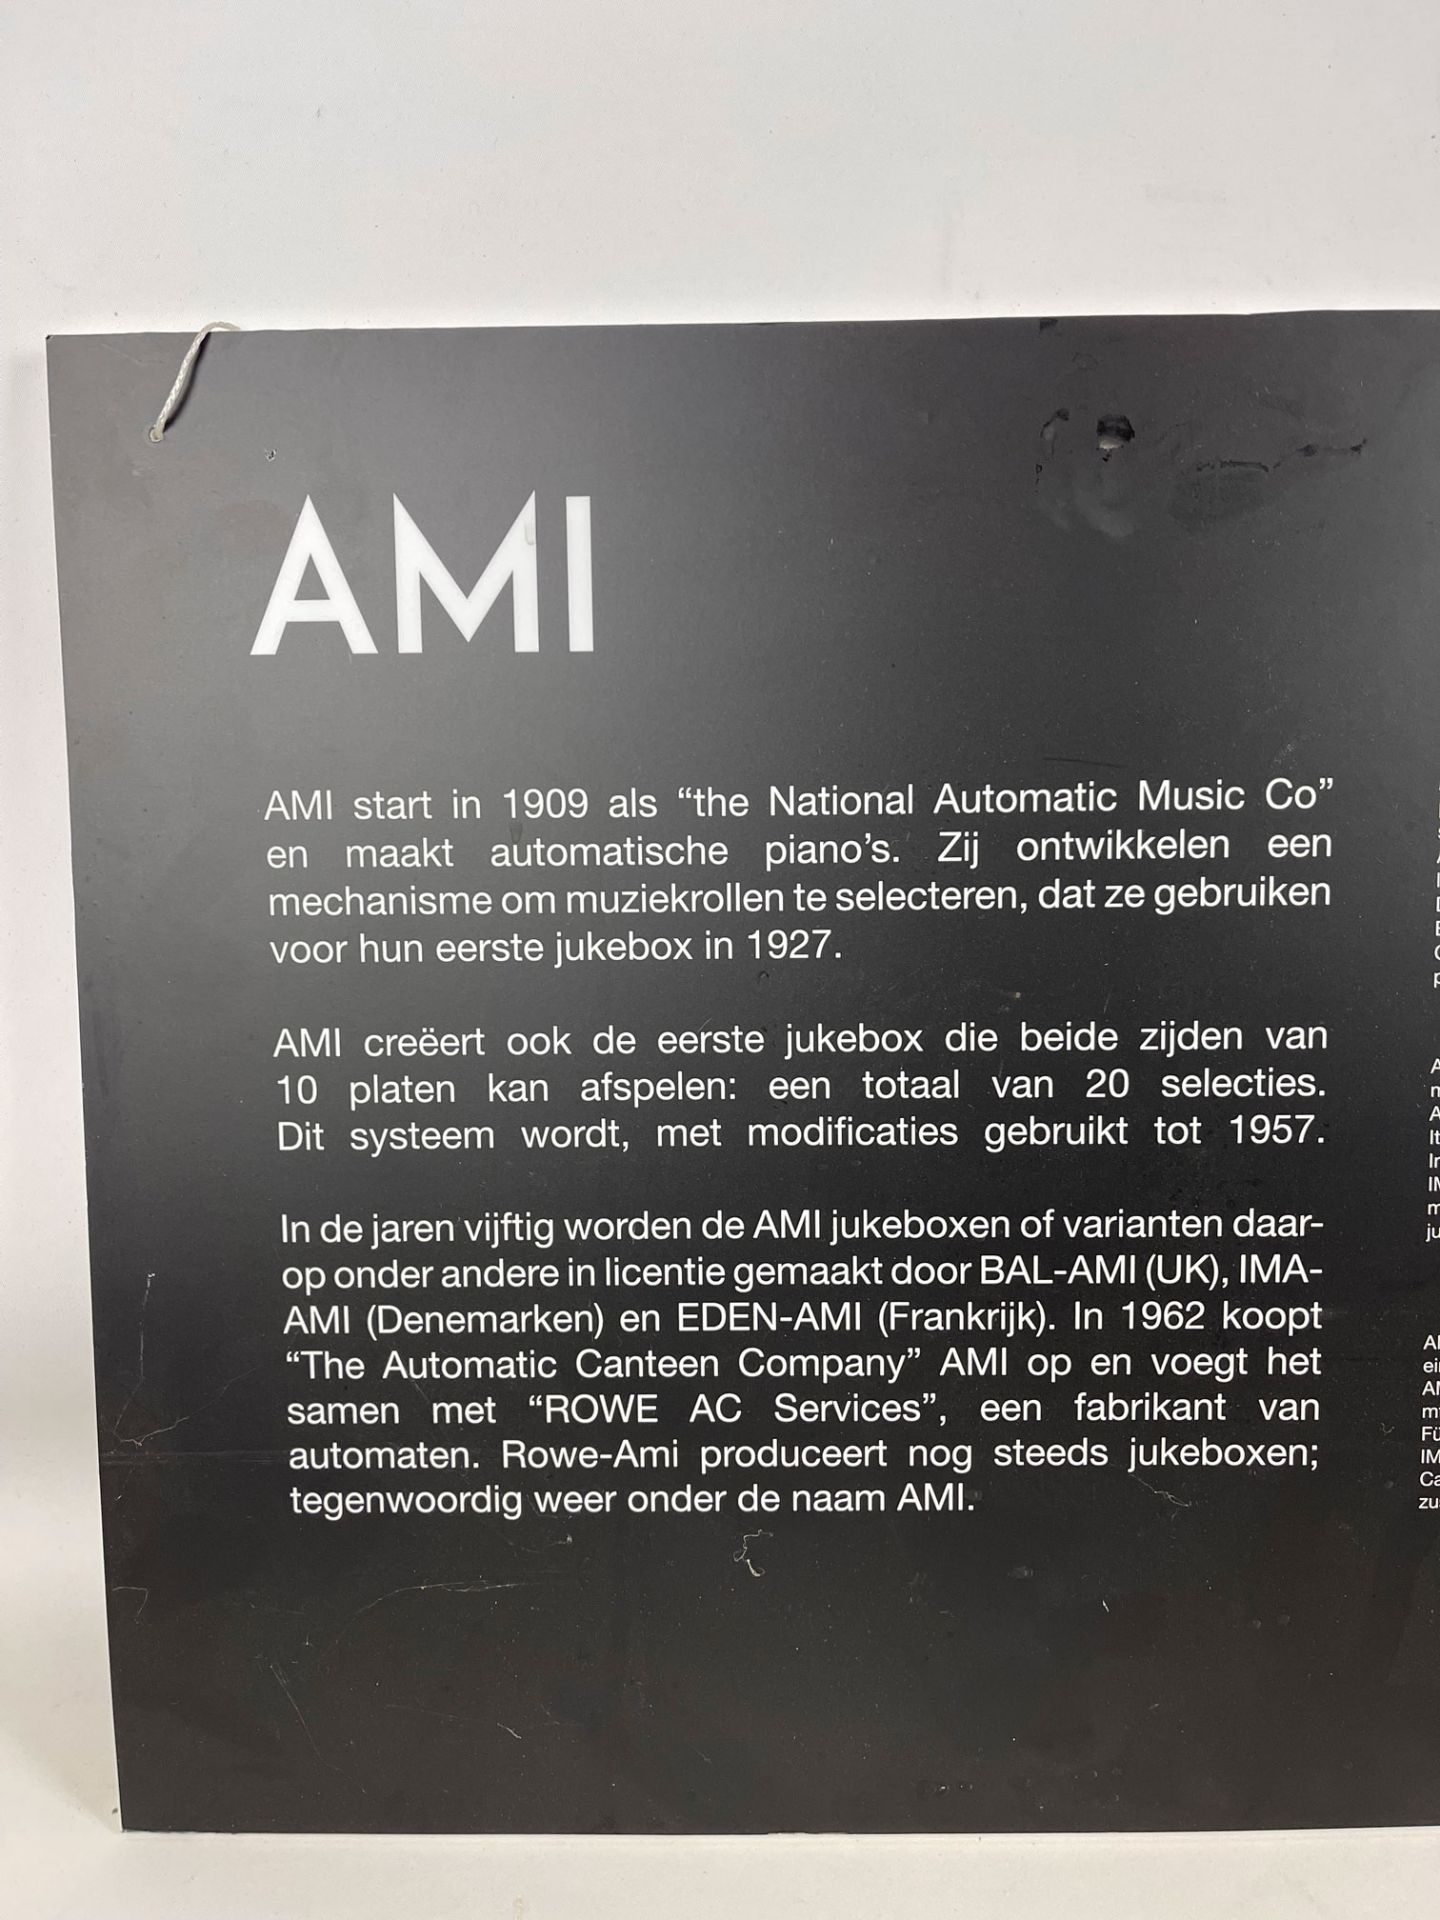 Multiple Language Info Sign from the Museum De Panne AMI Jukebox Section - Image 4 of 5